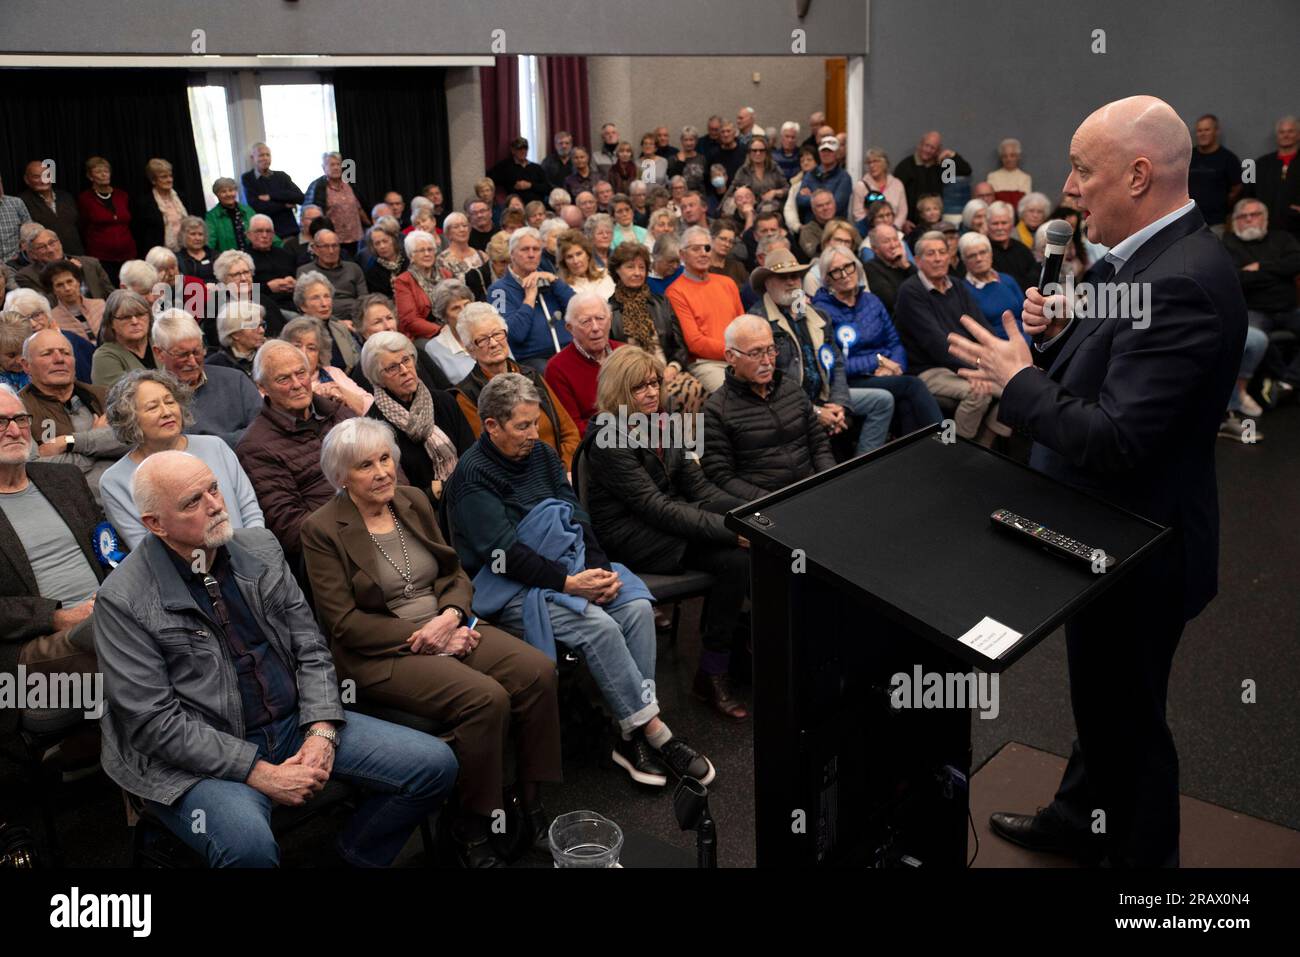 TAUPO, New Zealand - 6 July 2023: Christopher Luxon, the leader of New Zealand's main opposition party, the National Party speaks at a public meeting in the city of Taupo in the center of the country's North Island. The country heads to the polls on October 14. Picture: Giordano Stolley Stock Photo